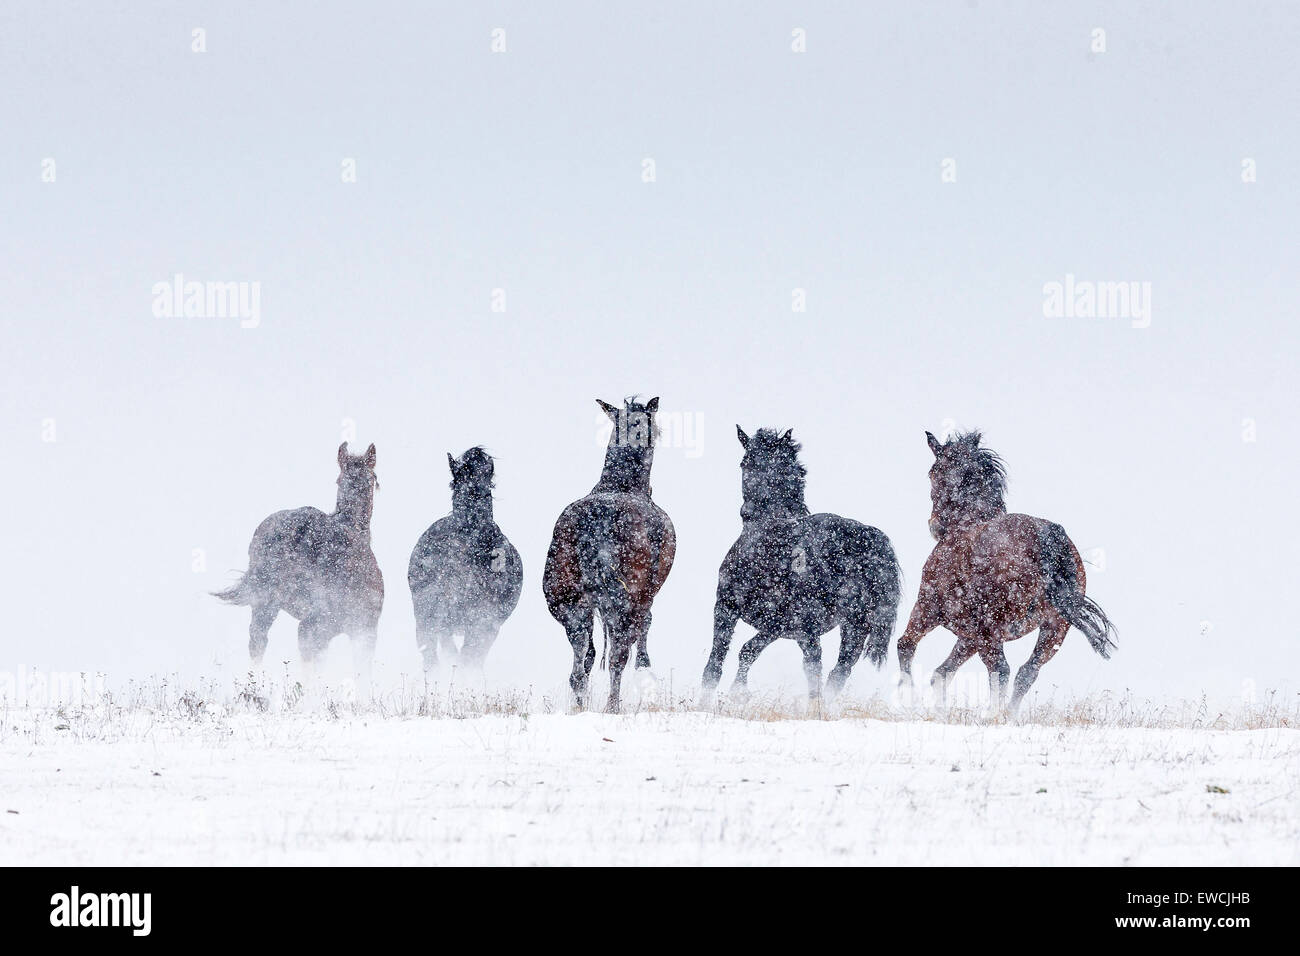 Warmblood. Five horses galloping on a snowy pasture in falling snow, rear view. Germany Stock Photo